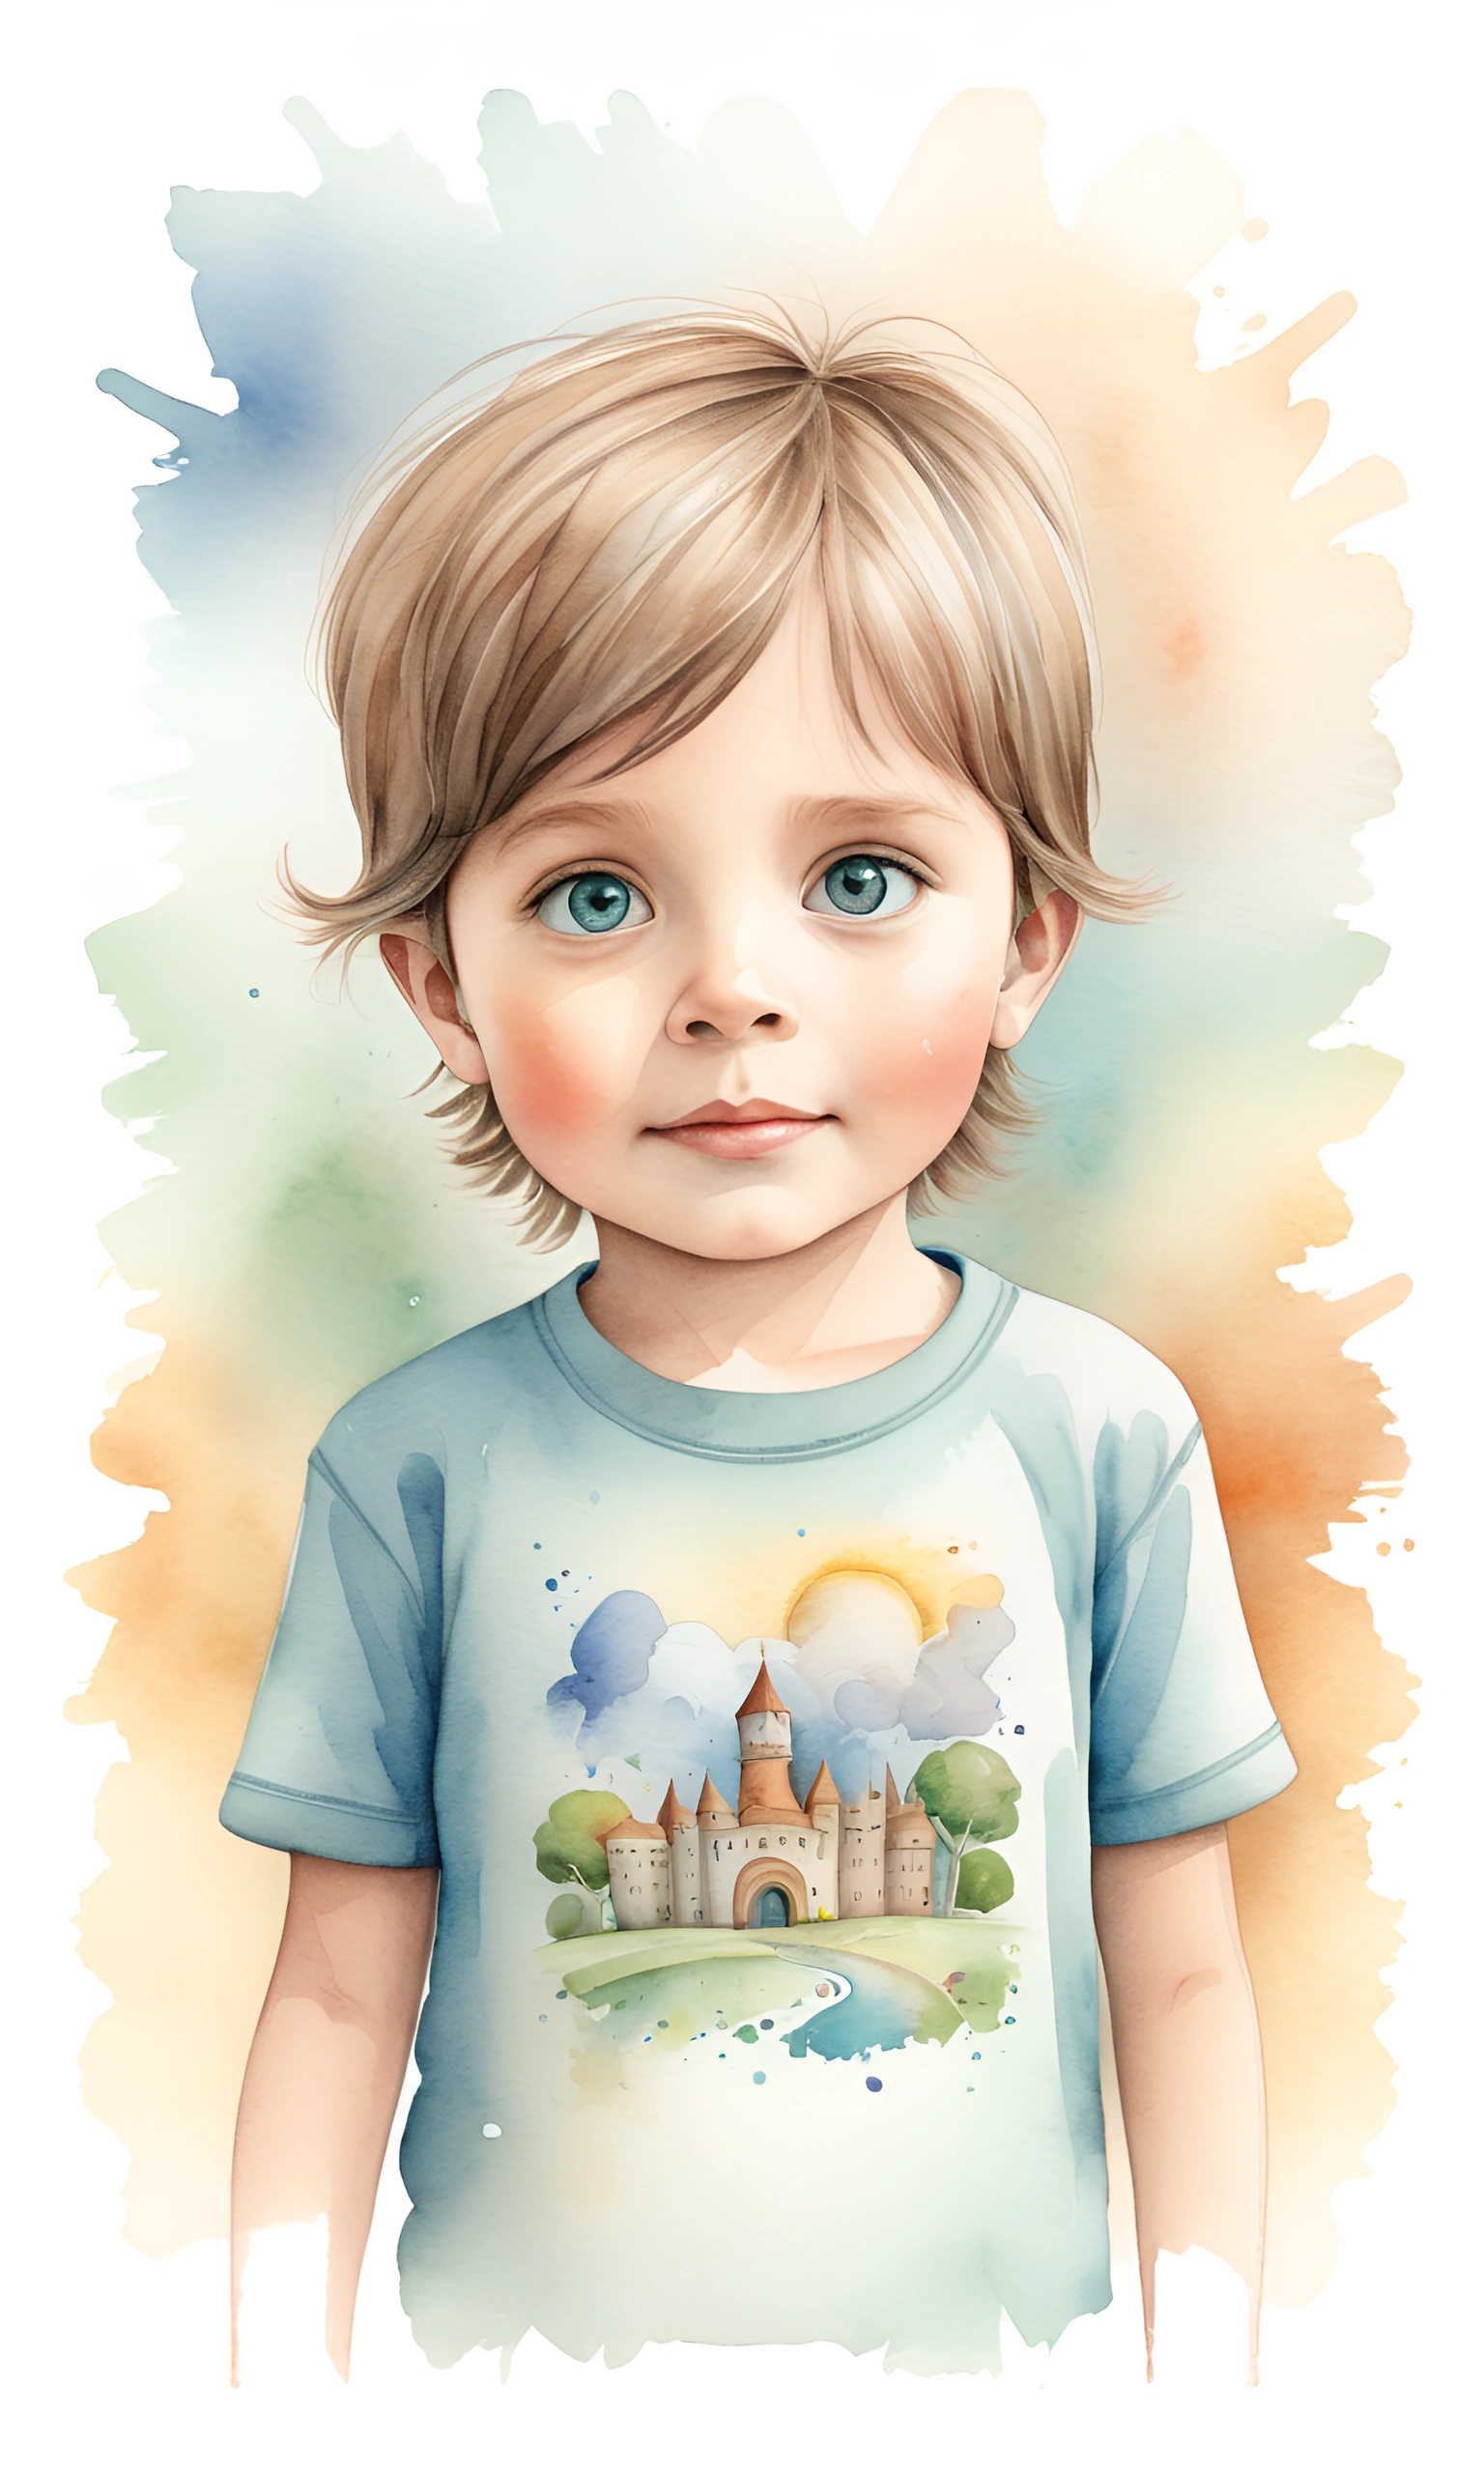 painting of a young boy with a blue shirt and a castle